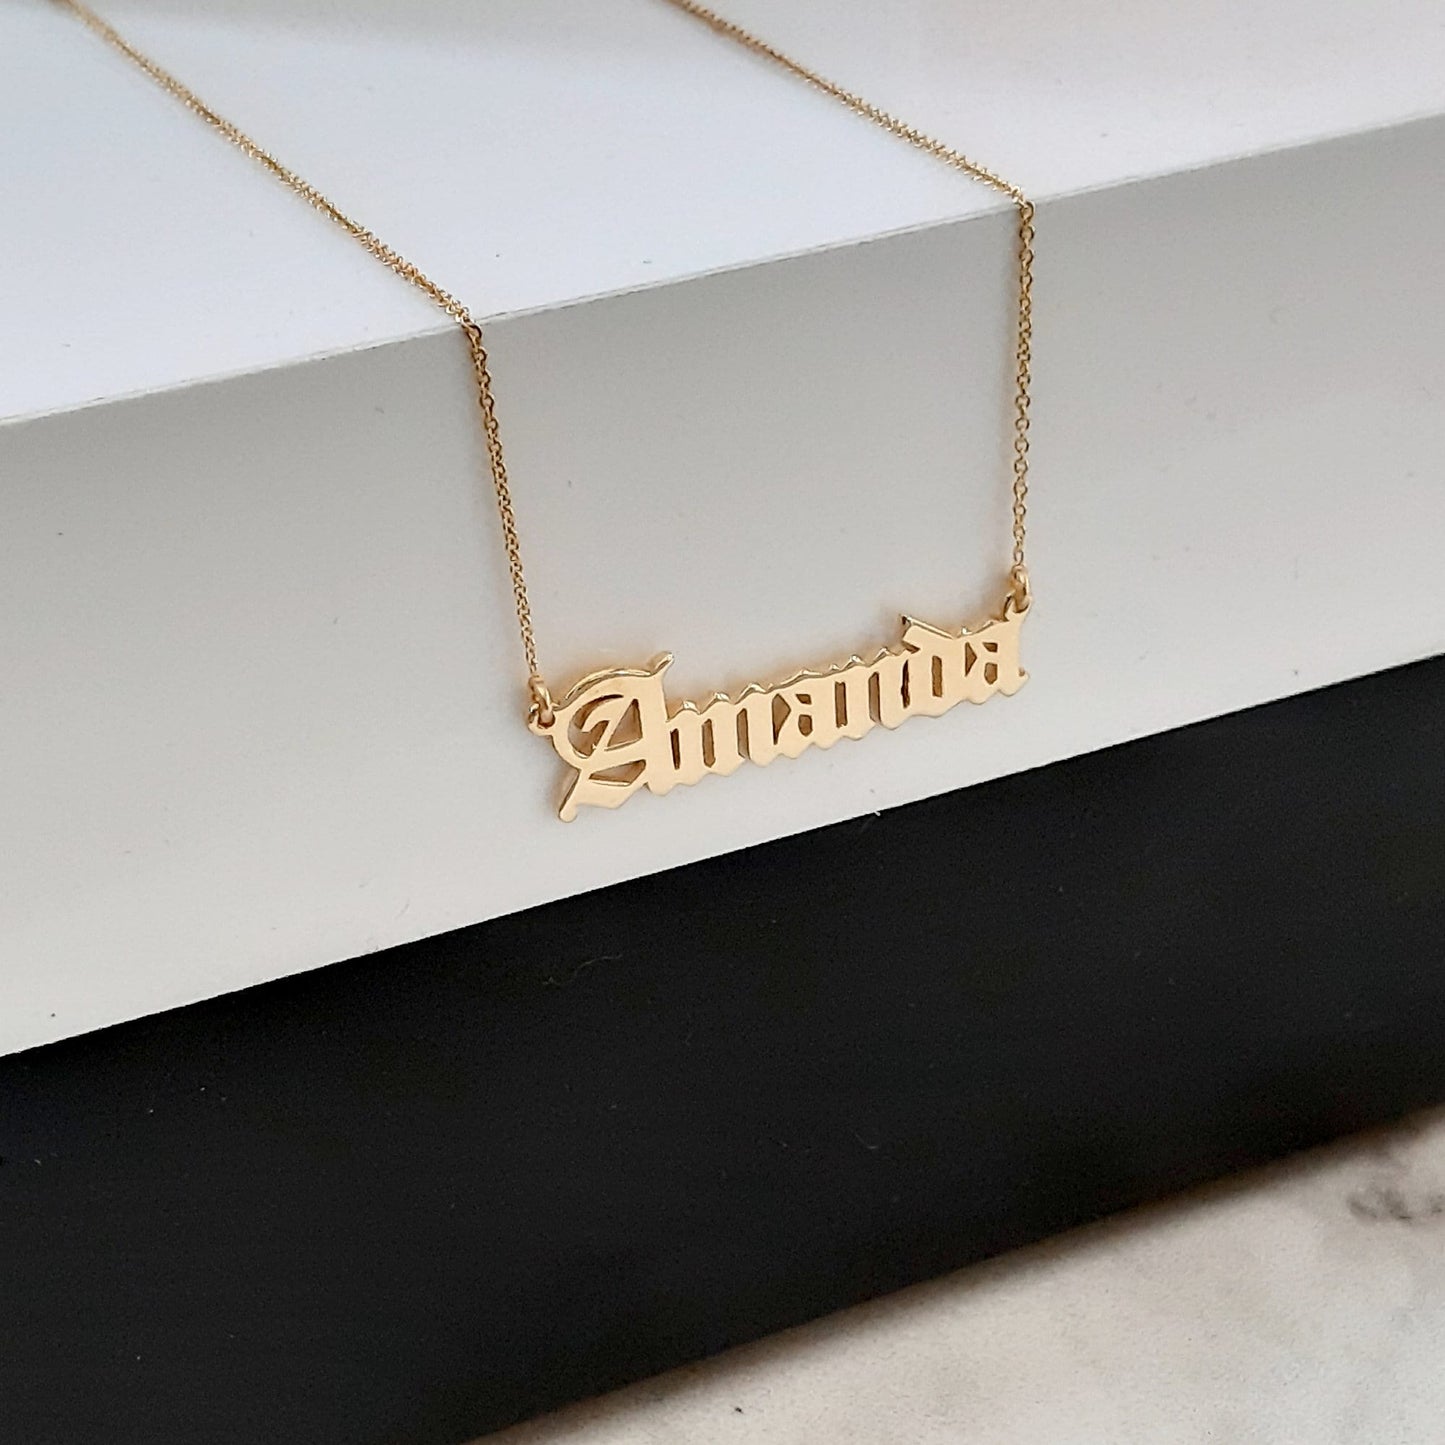 Customize Old English Number Necklace, Gothic Birth Year Necklace,Year Birth Necklace,Personalized Number Necklace, gold New Year Necklace